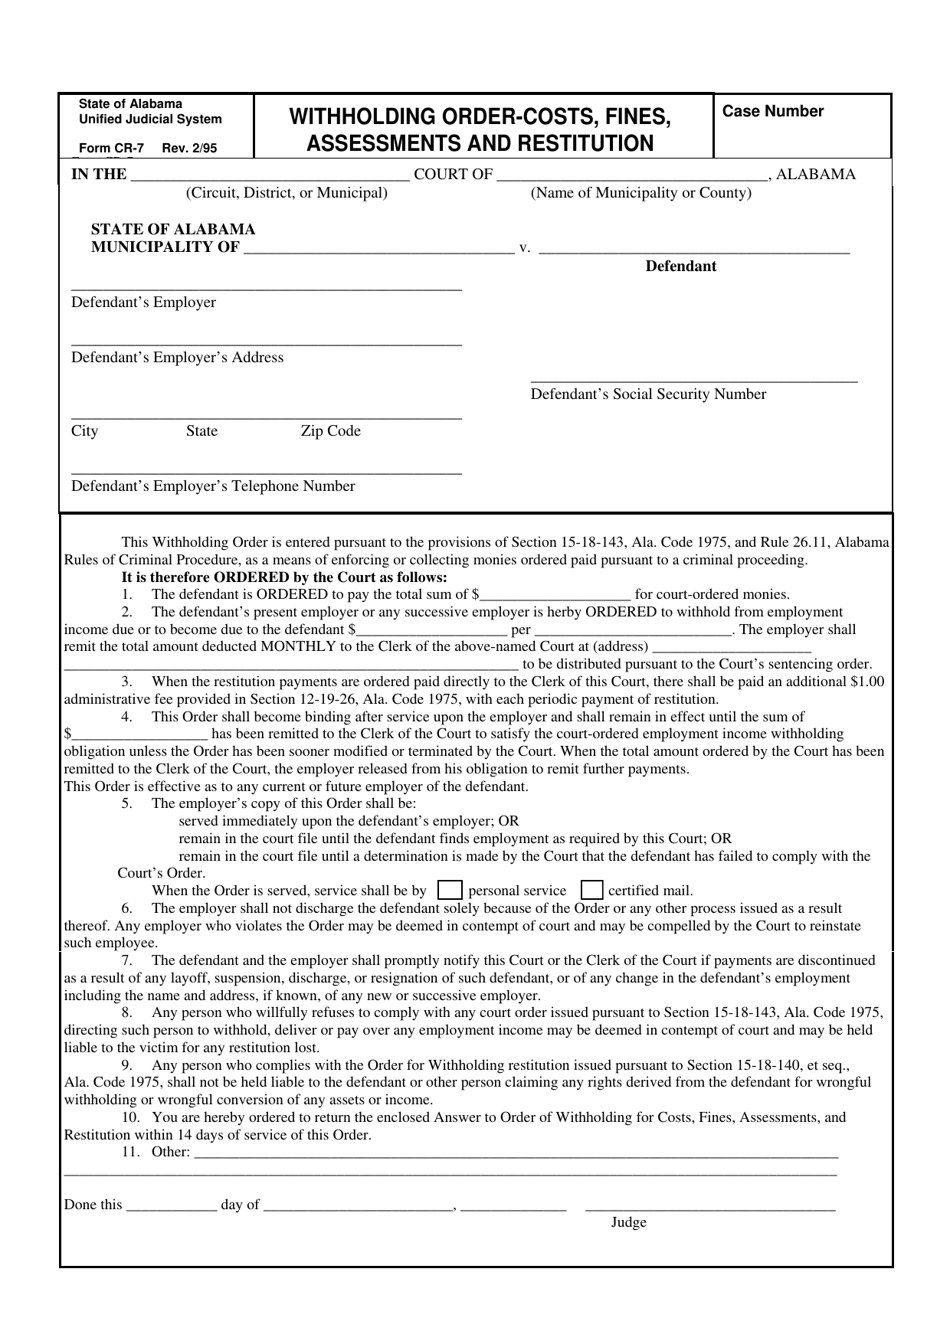 Form CR-07 Withholding Order-Costs, Fines, Assessments and Restitution - Alabama, Page 1